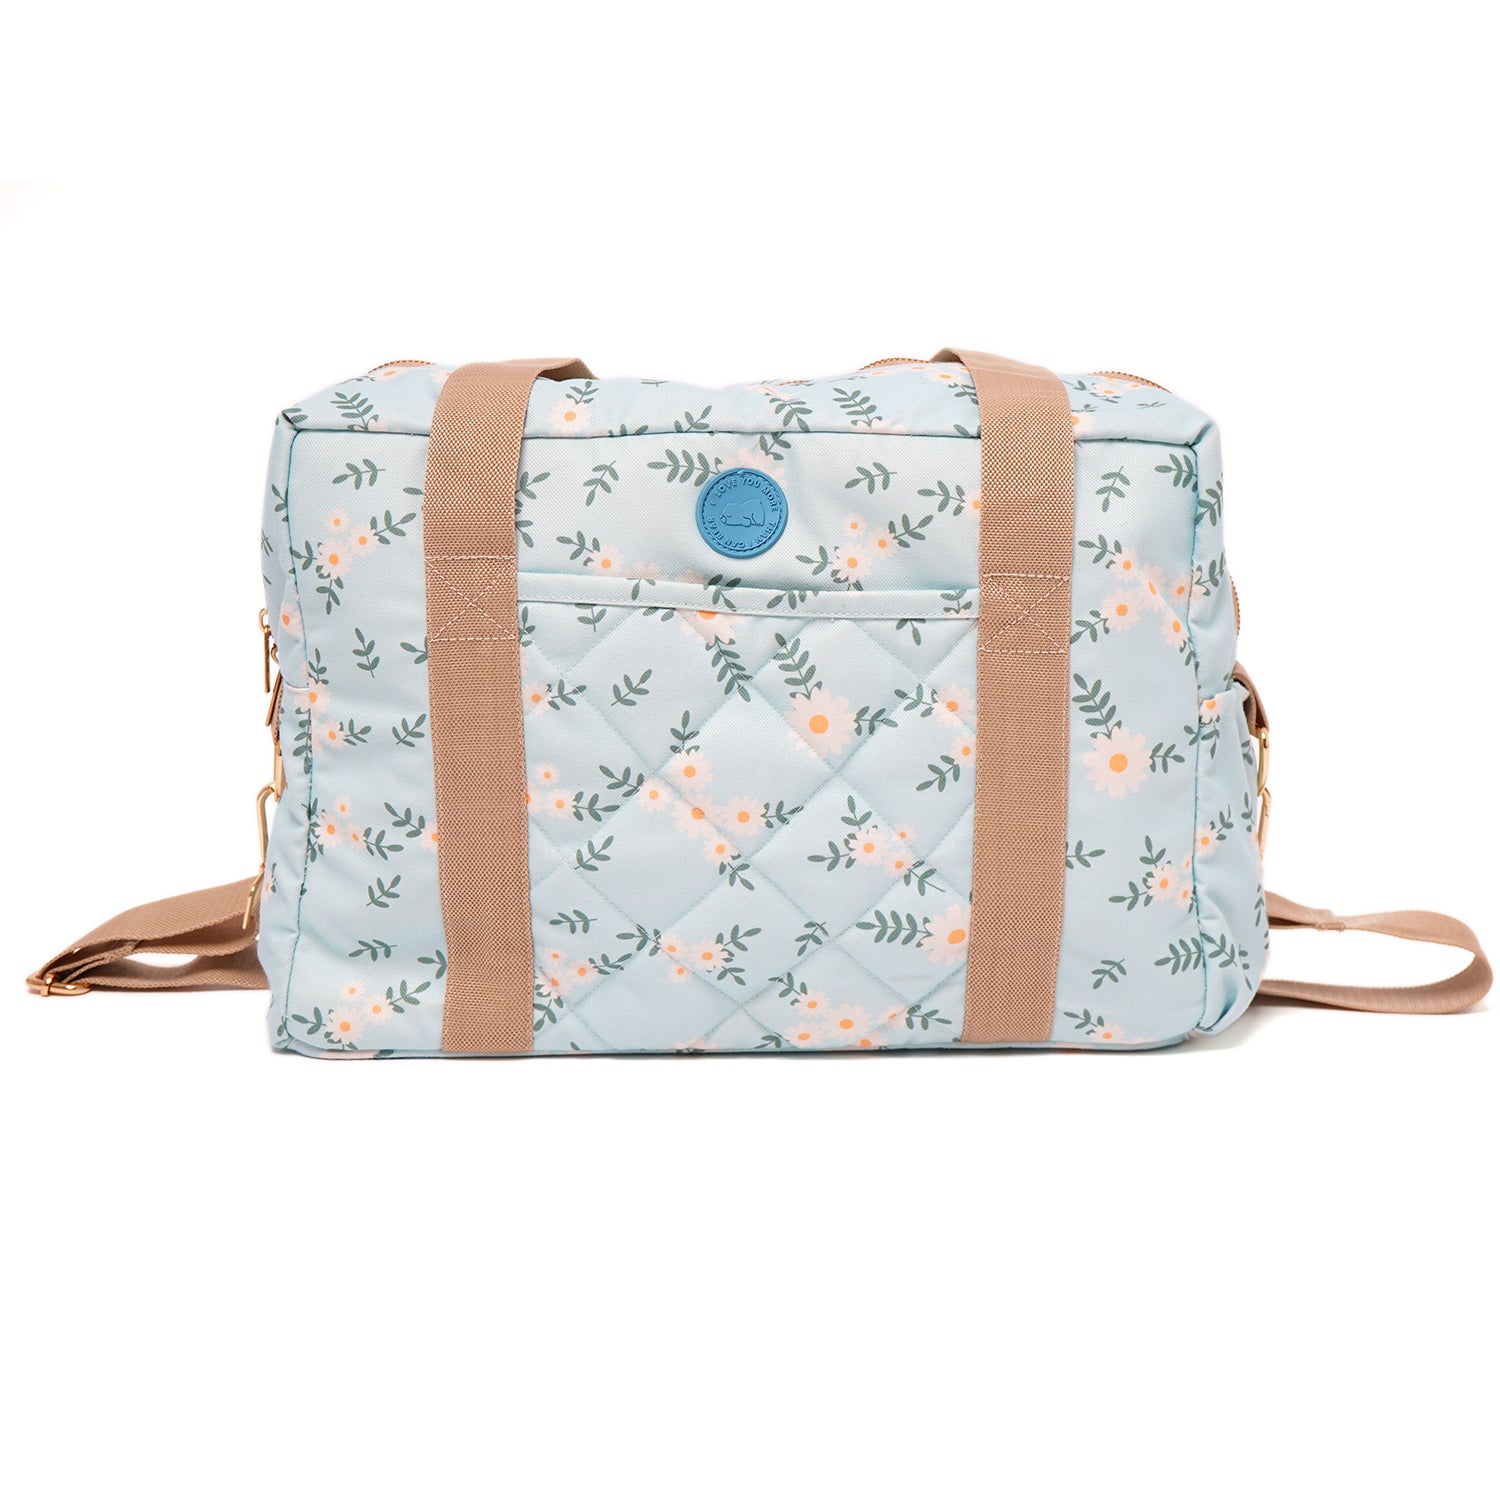 Diaper Bags For Moms | Mothers Maternity Bags for Travel | Multifunctional Diaper Backpack  ( Daisy Flower )